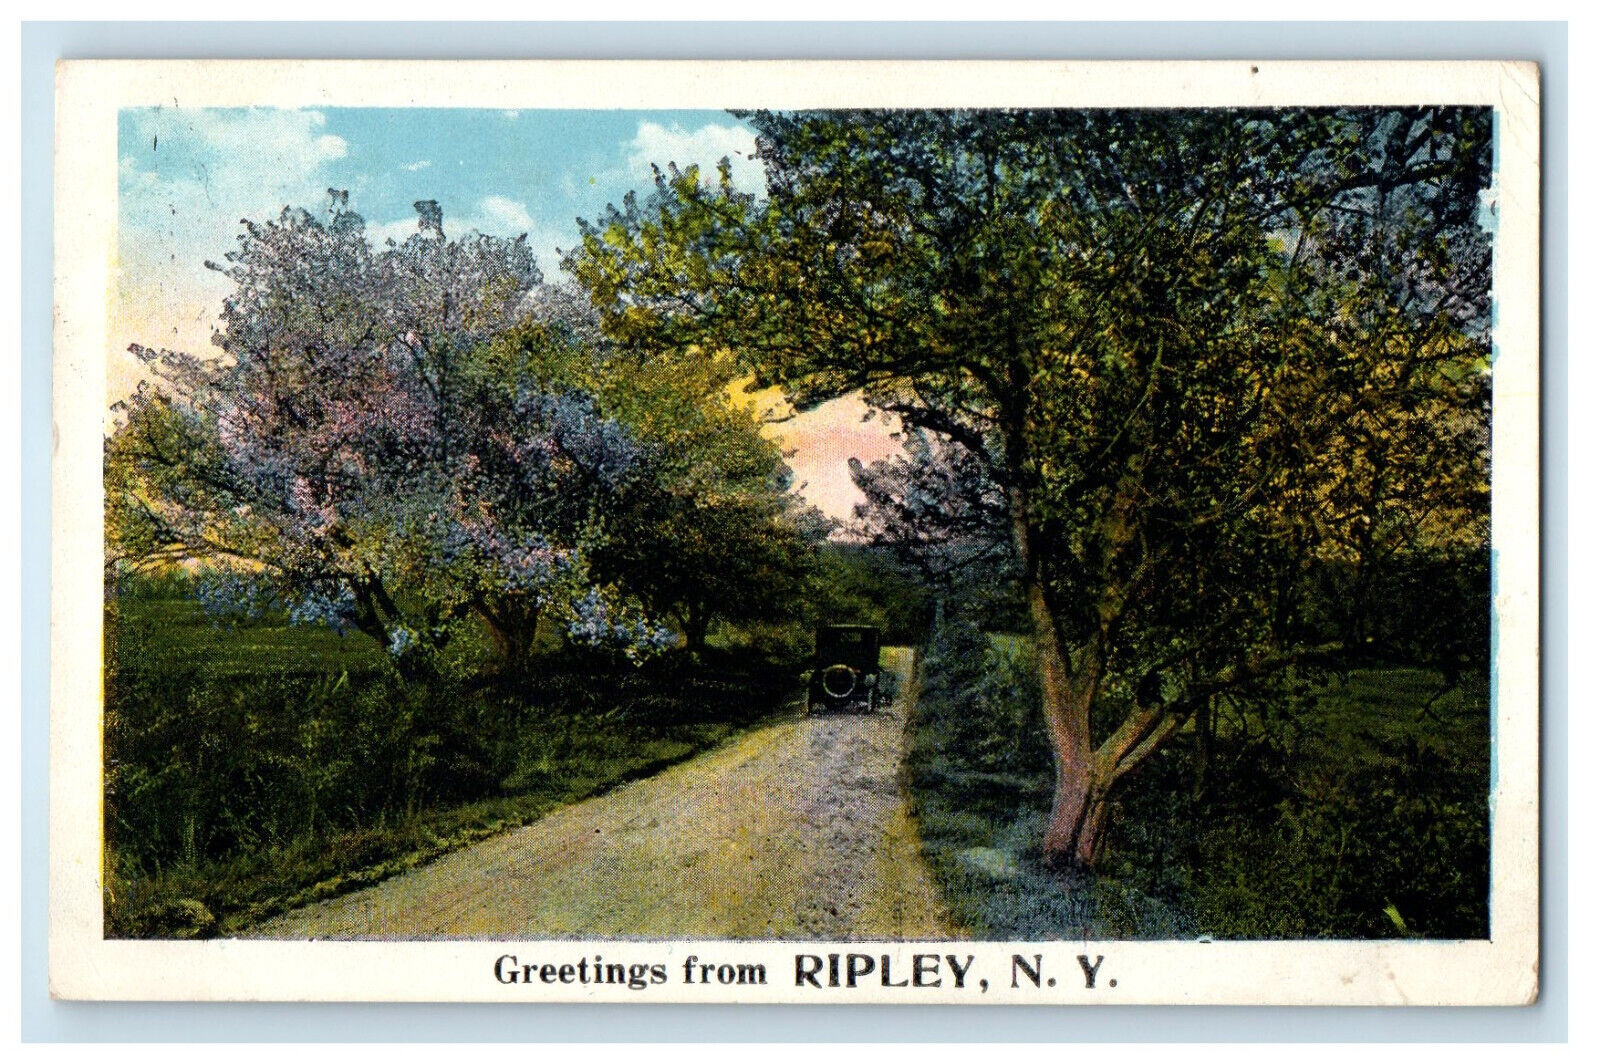 1923 Road View Greetings from Ripley New York NY Posted Vintage Postcard